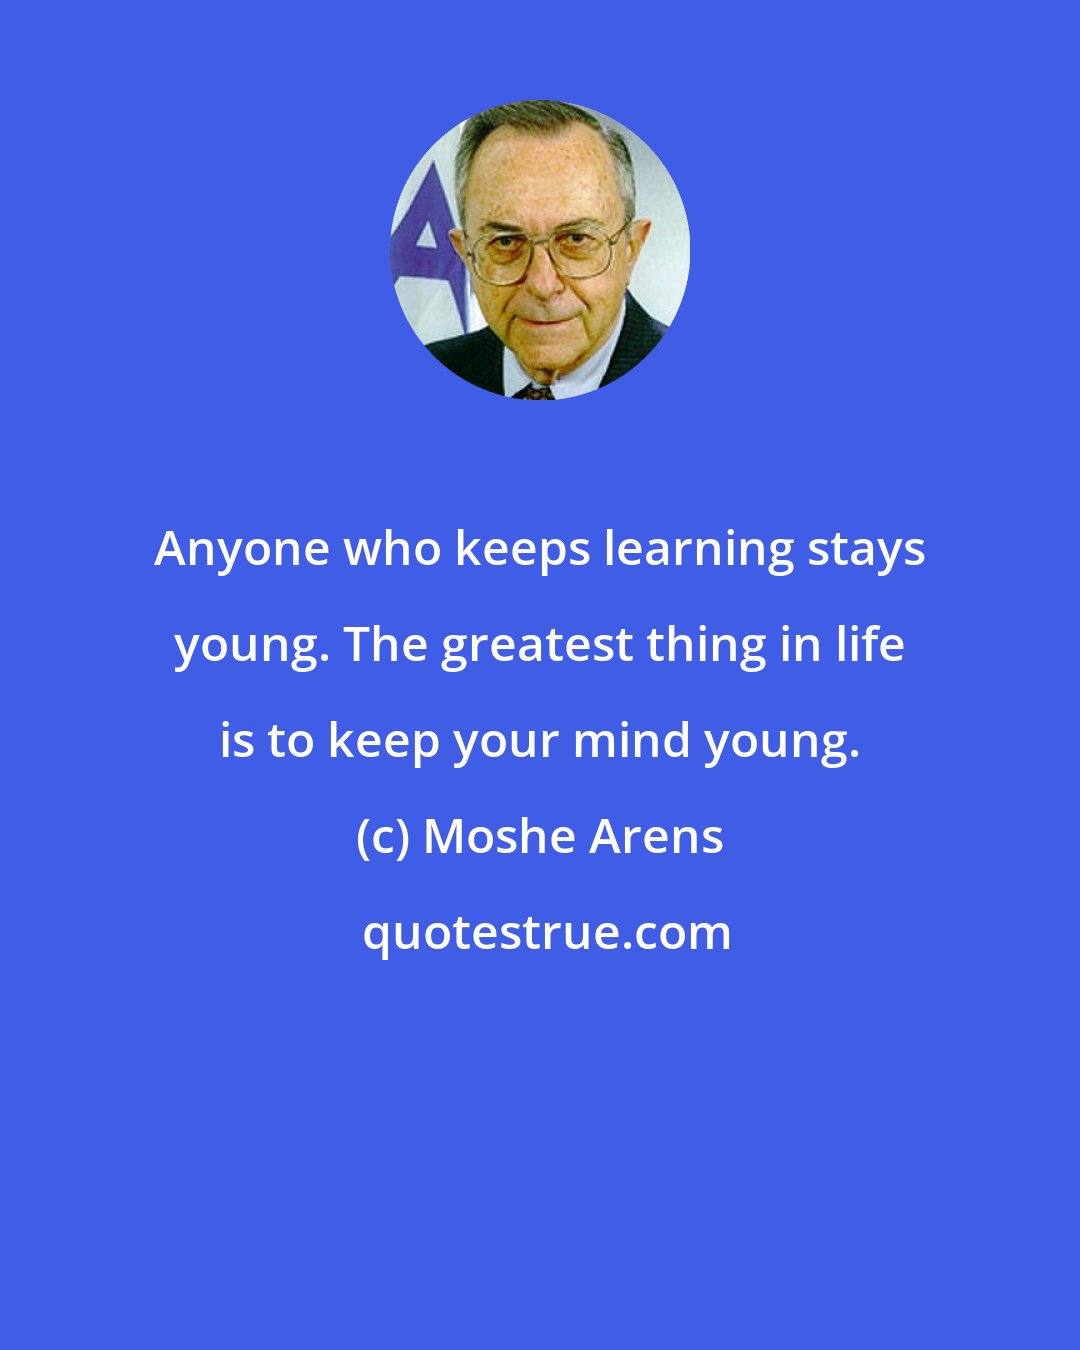 Moshe Arens: Anyone who keeps learning stays young. The greatest thing in life is to keep your mind young.